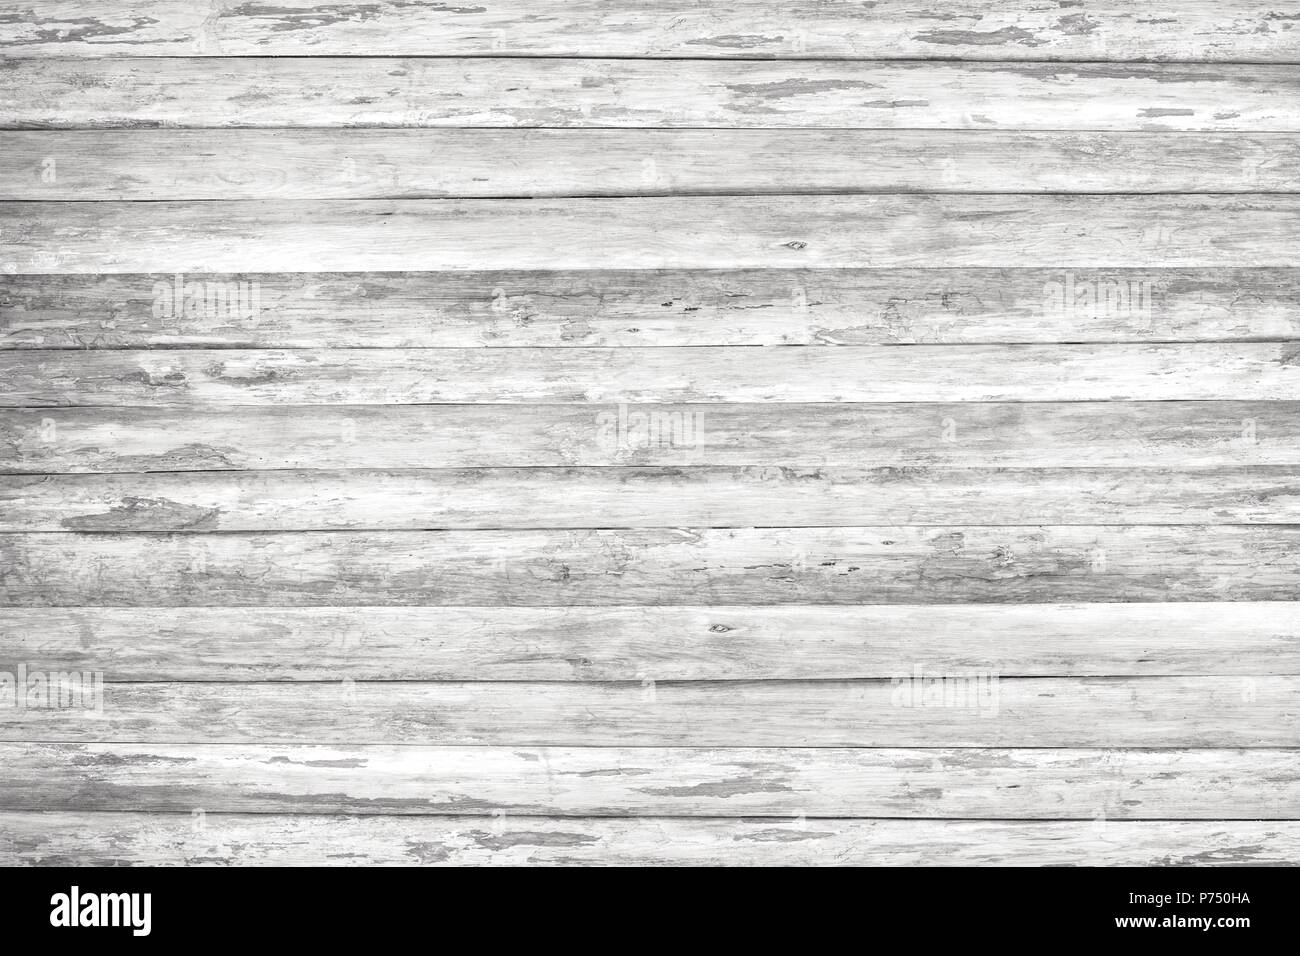 Wood texture background, white wood planks. Grunge washed wooden wall pattern. Stock Photo